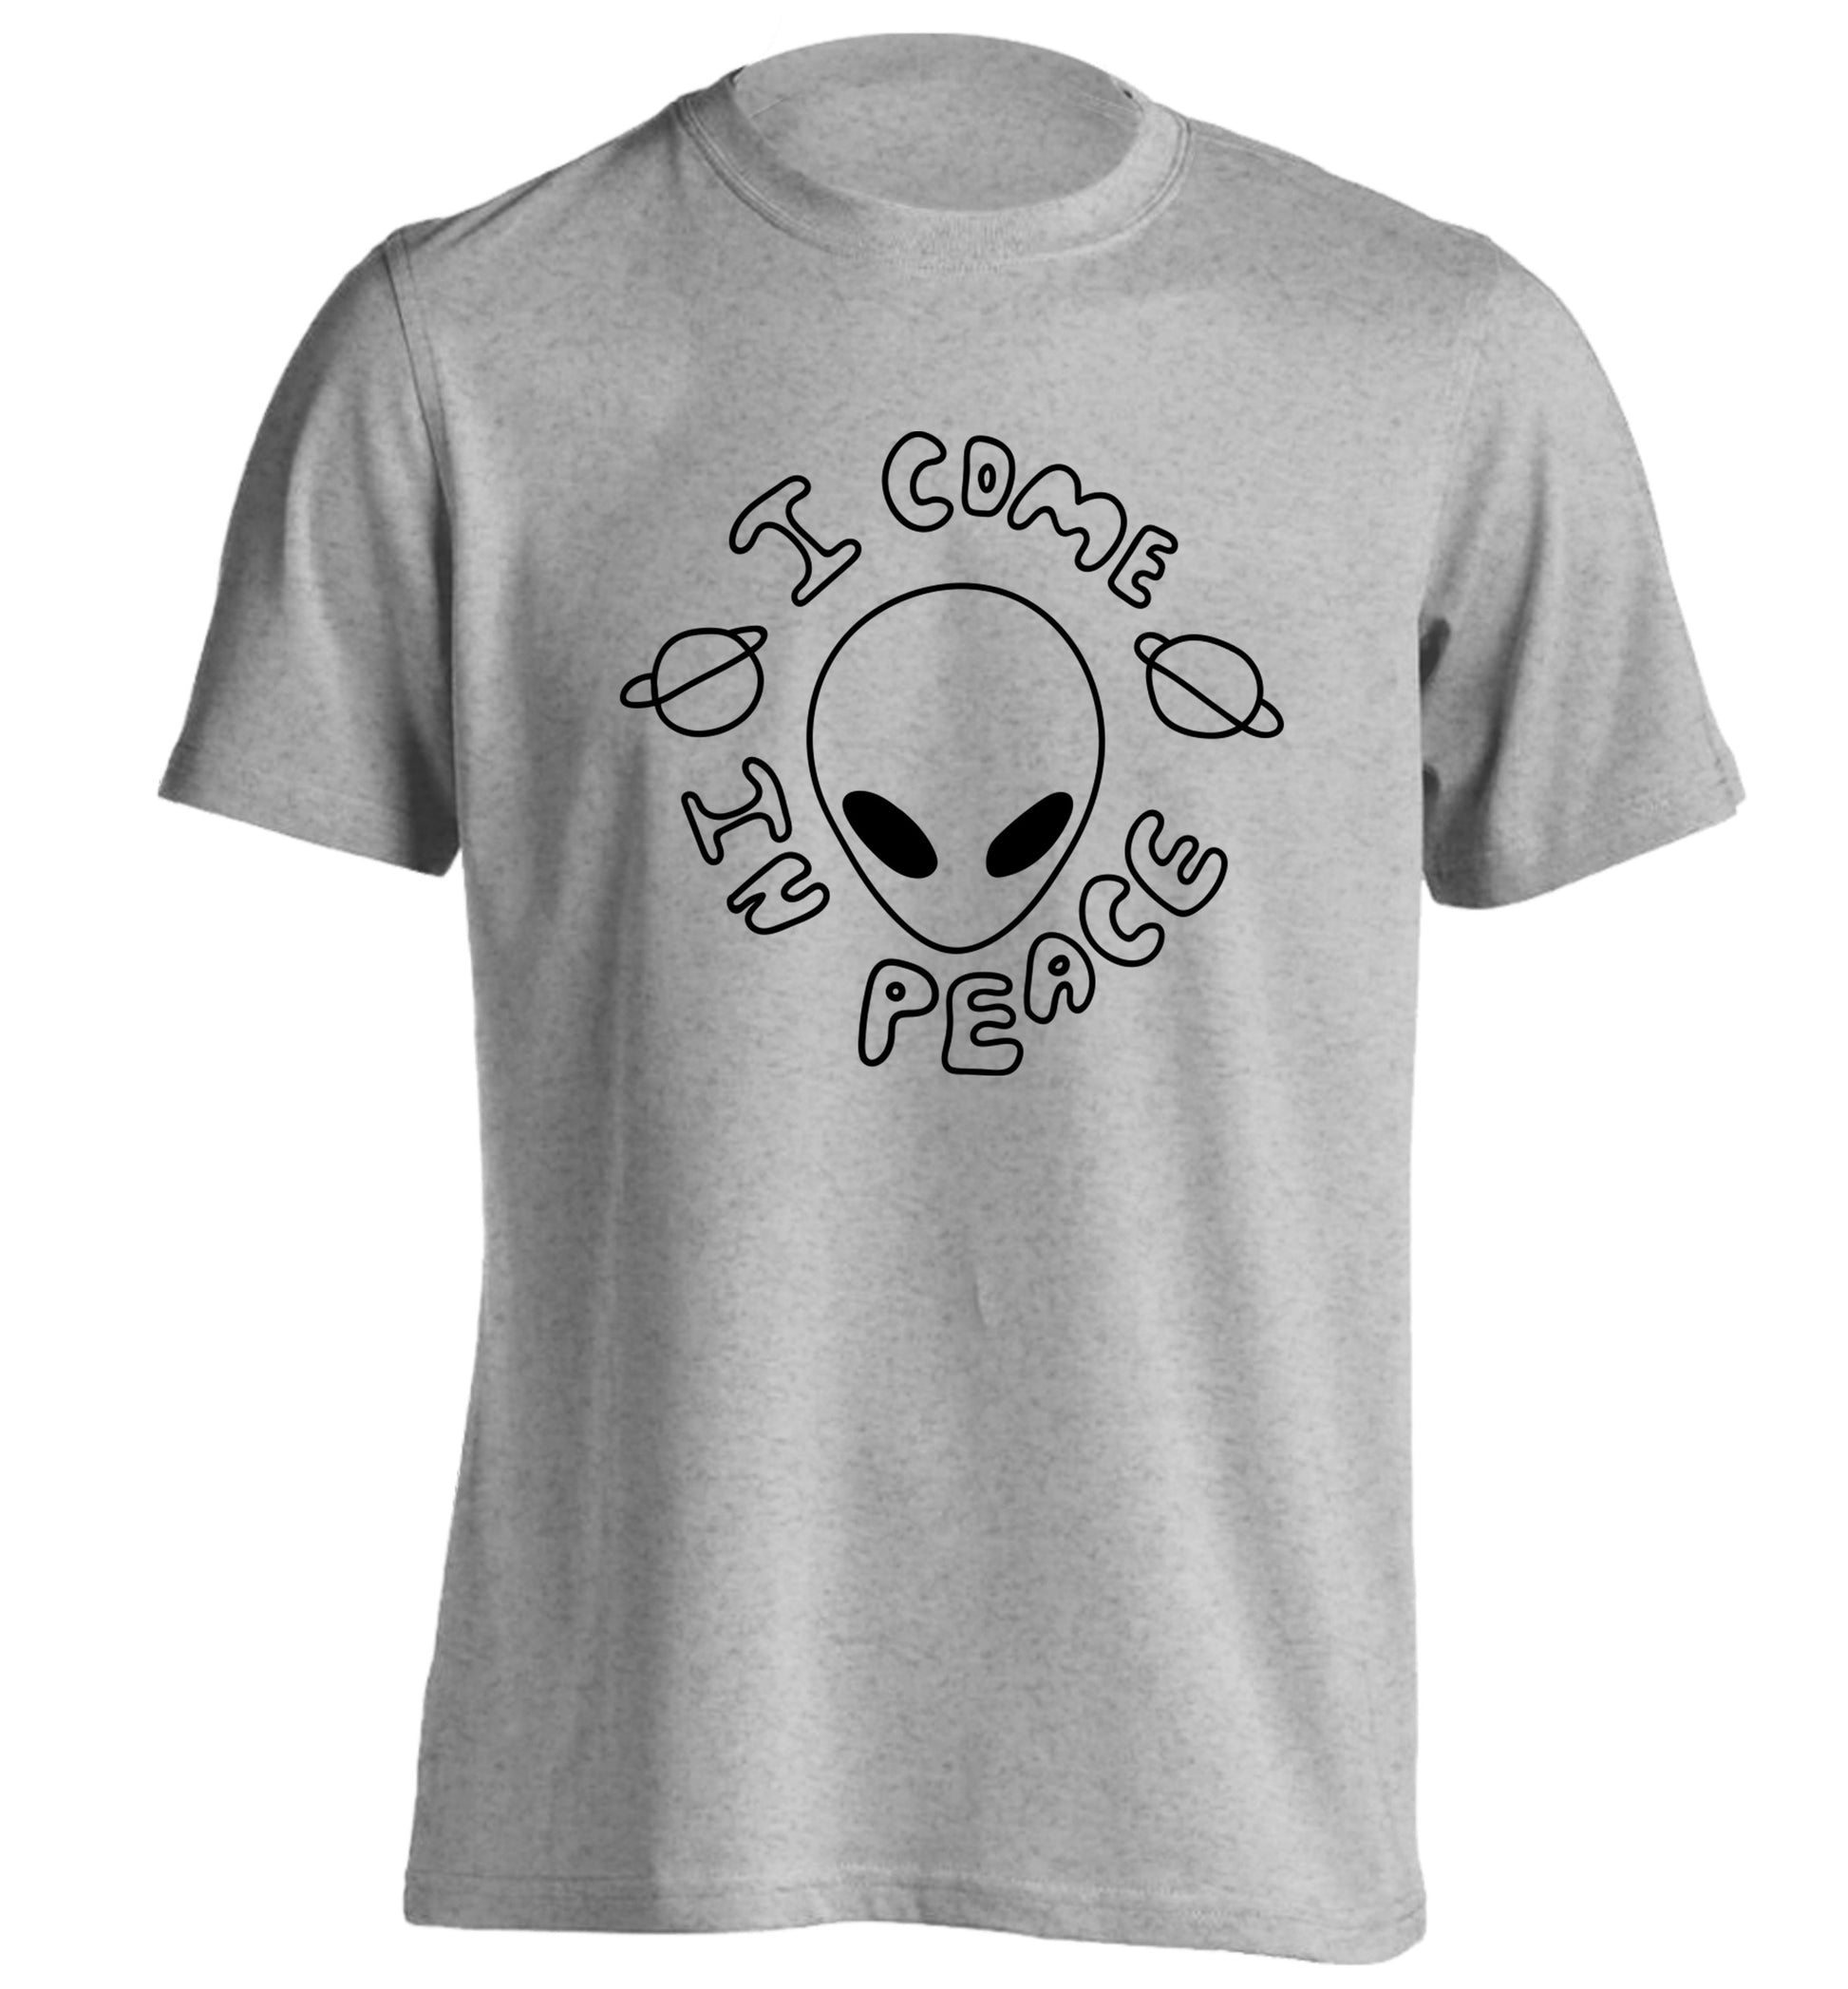 I come in peace adults unisex grey Tshirt 2XL